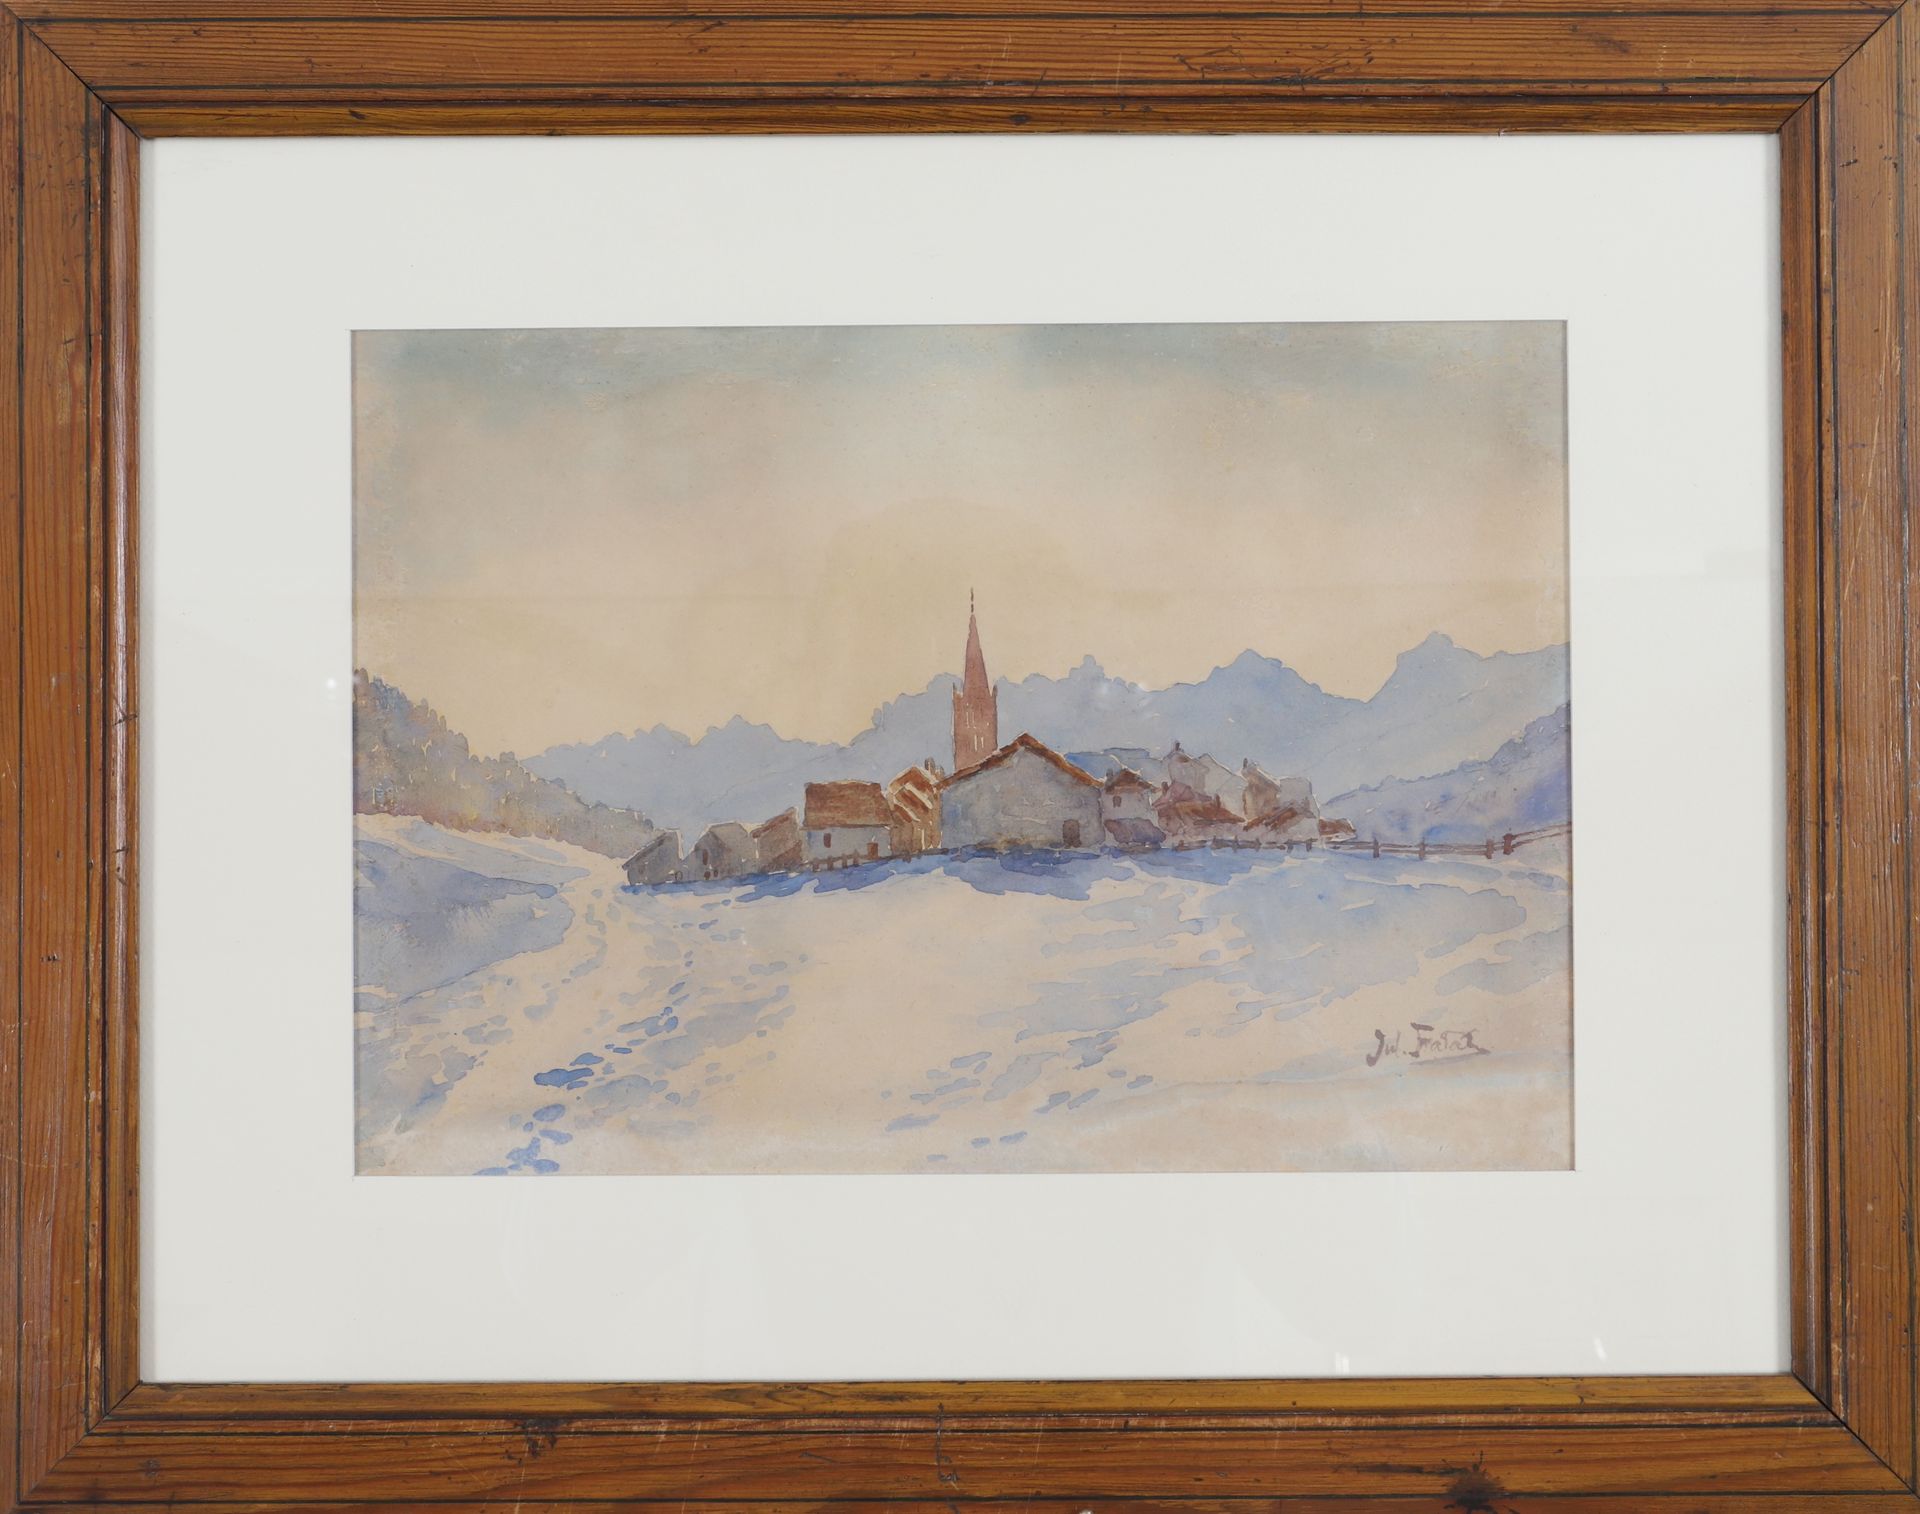 Null Julian FALAT (1853-1929)
Rare watercolor depicting a snowy view
Signed lowe&hellip;